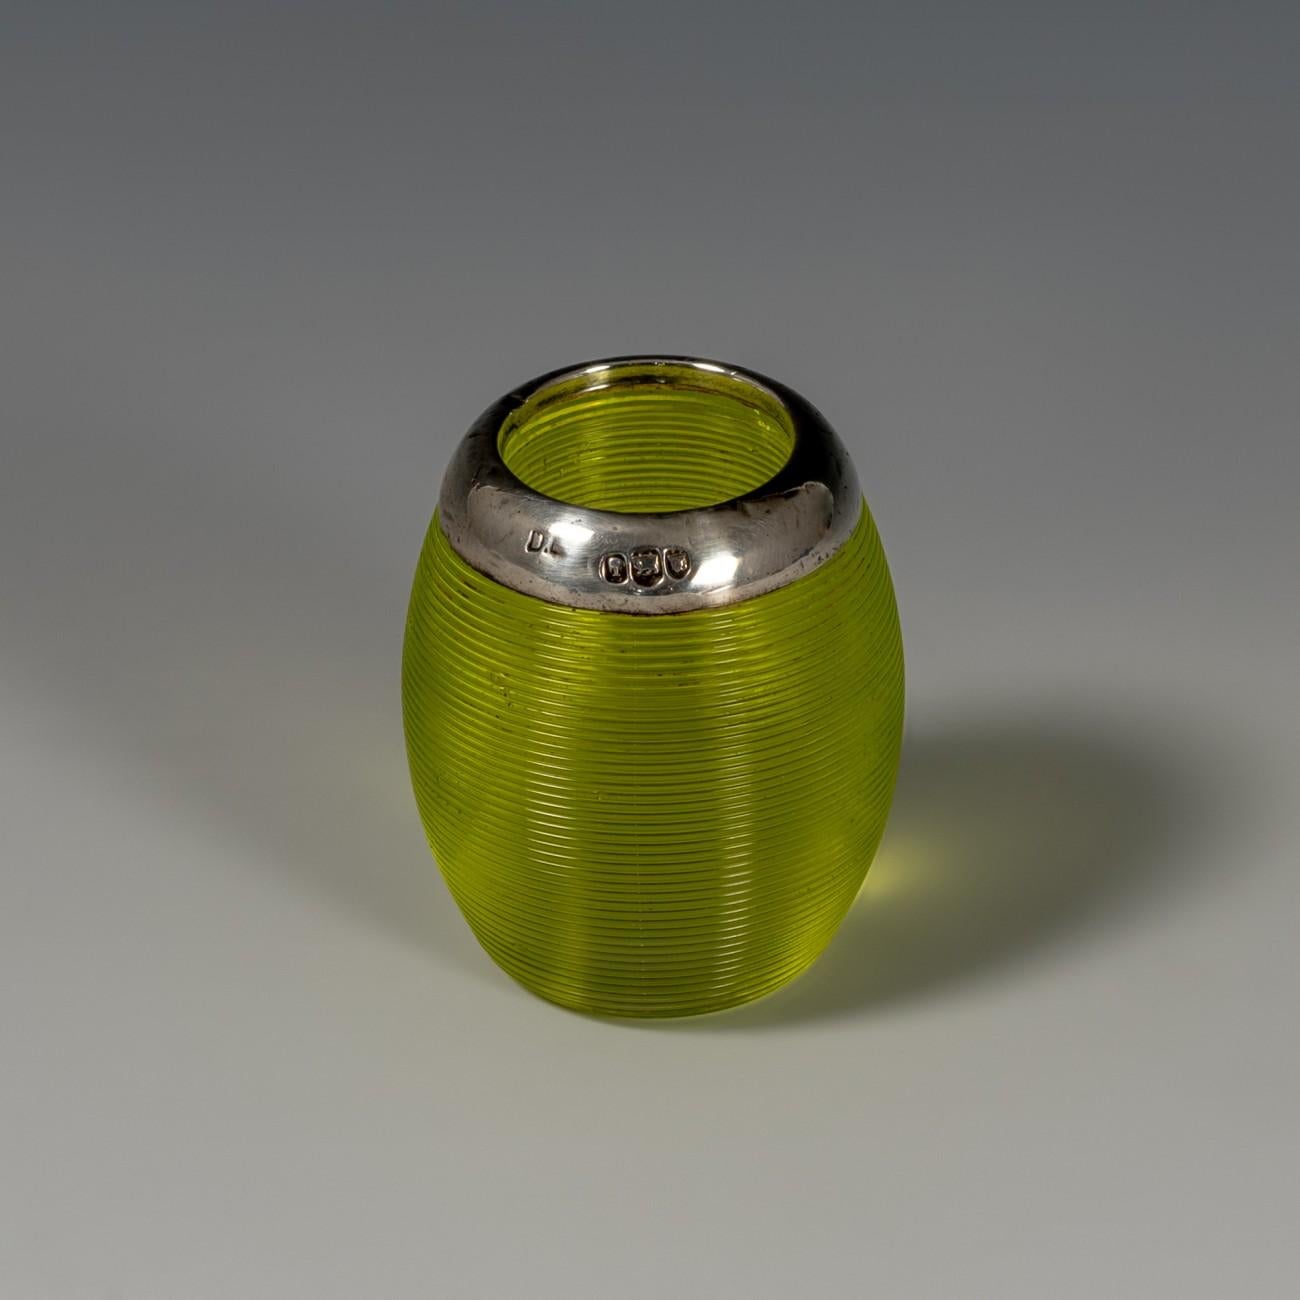 A small lime colored ovoid shaped glass match striker with silver collar, hallmarked London, 1906.

Dimensions: 3.25 cm/1¼ inches (max. diameter) x 4 cm/1⅝ inches (height)

Bentleys are Members of LAPADA, the London and Provincial Antique Dealers